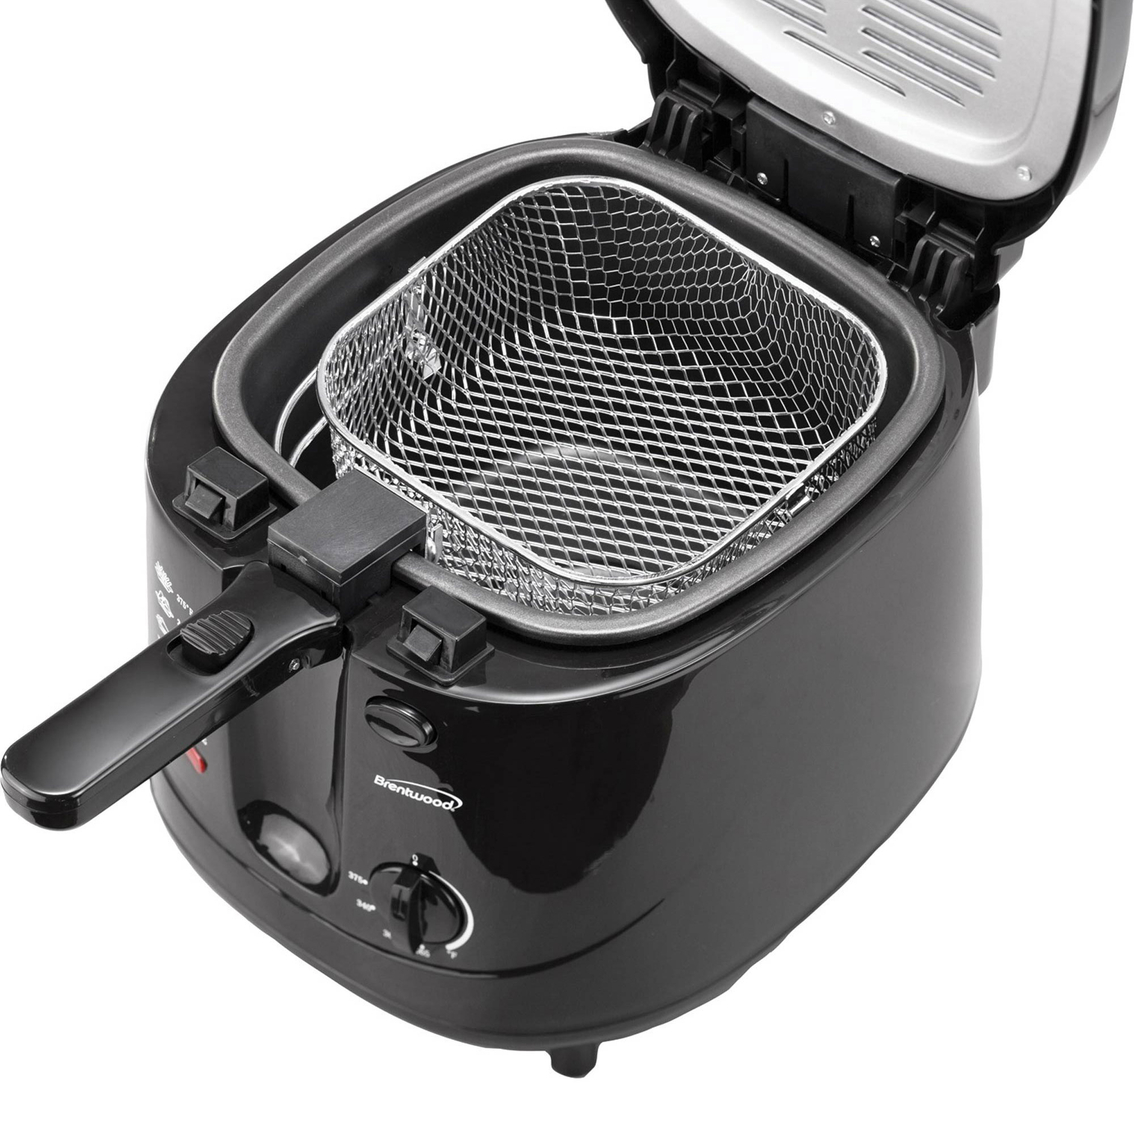 Brentwood 12 Cup Electric Deep Fryer - Image 6 of 9